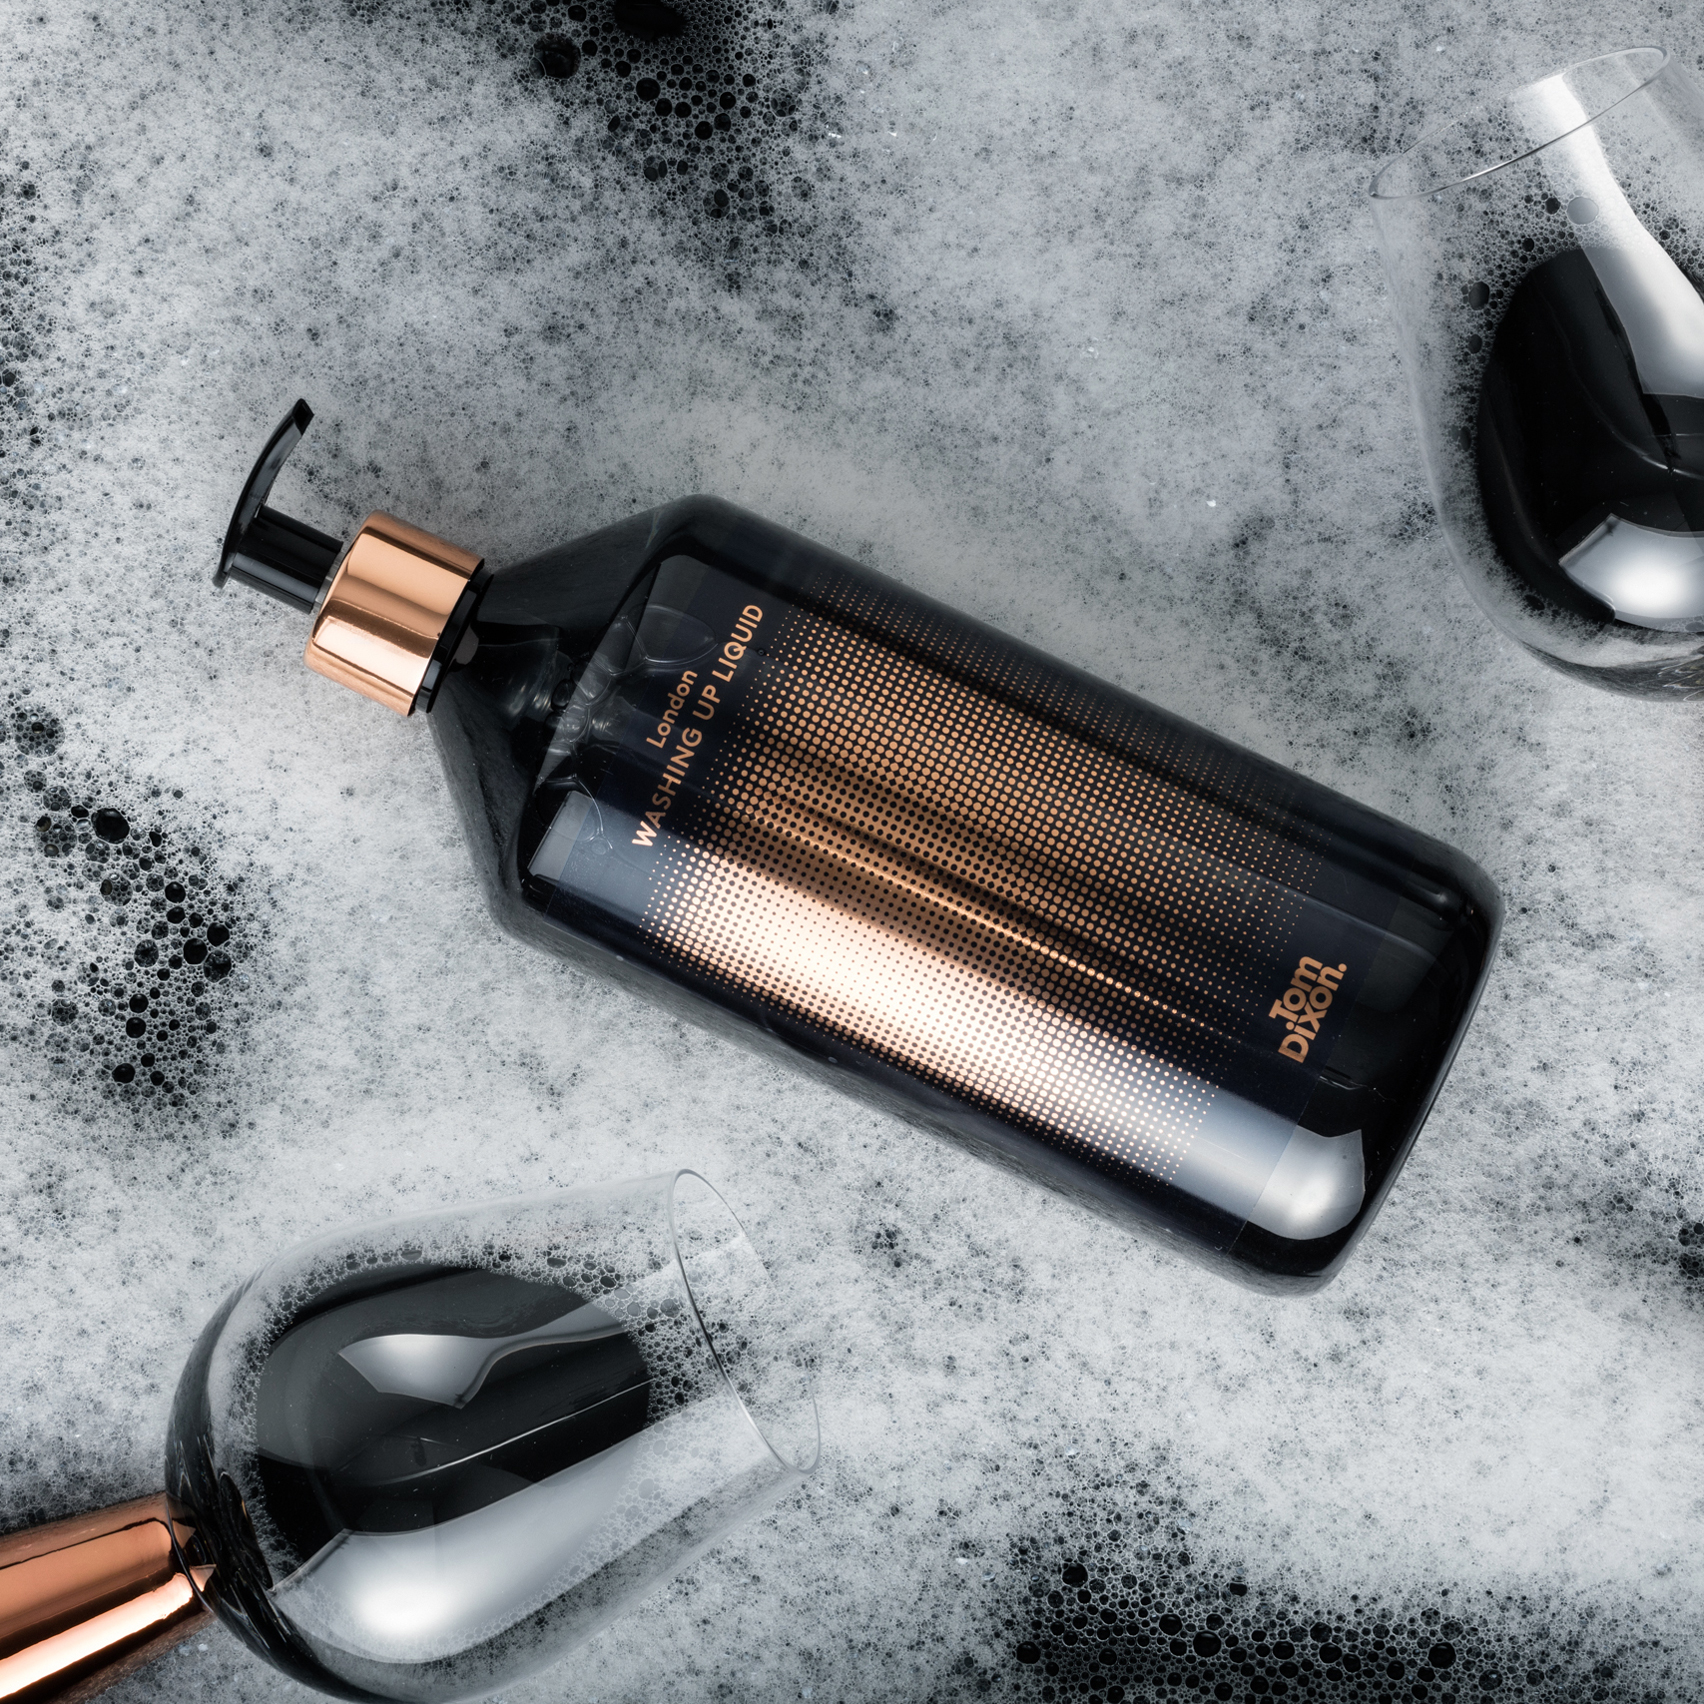 Tom Dixon extends to include washing-up liquid